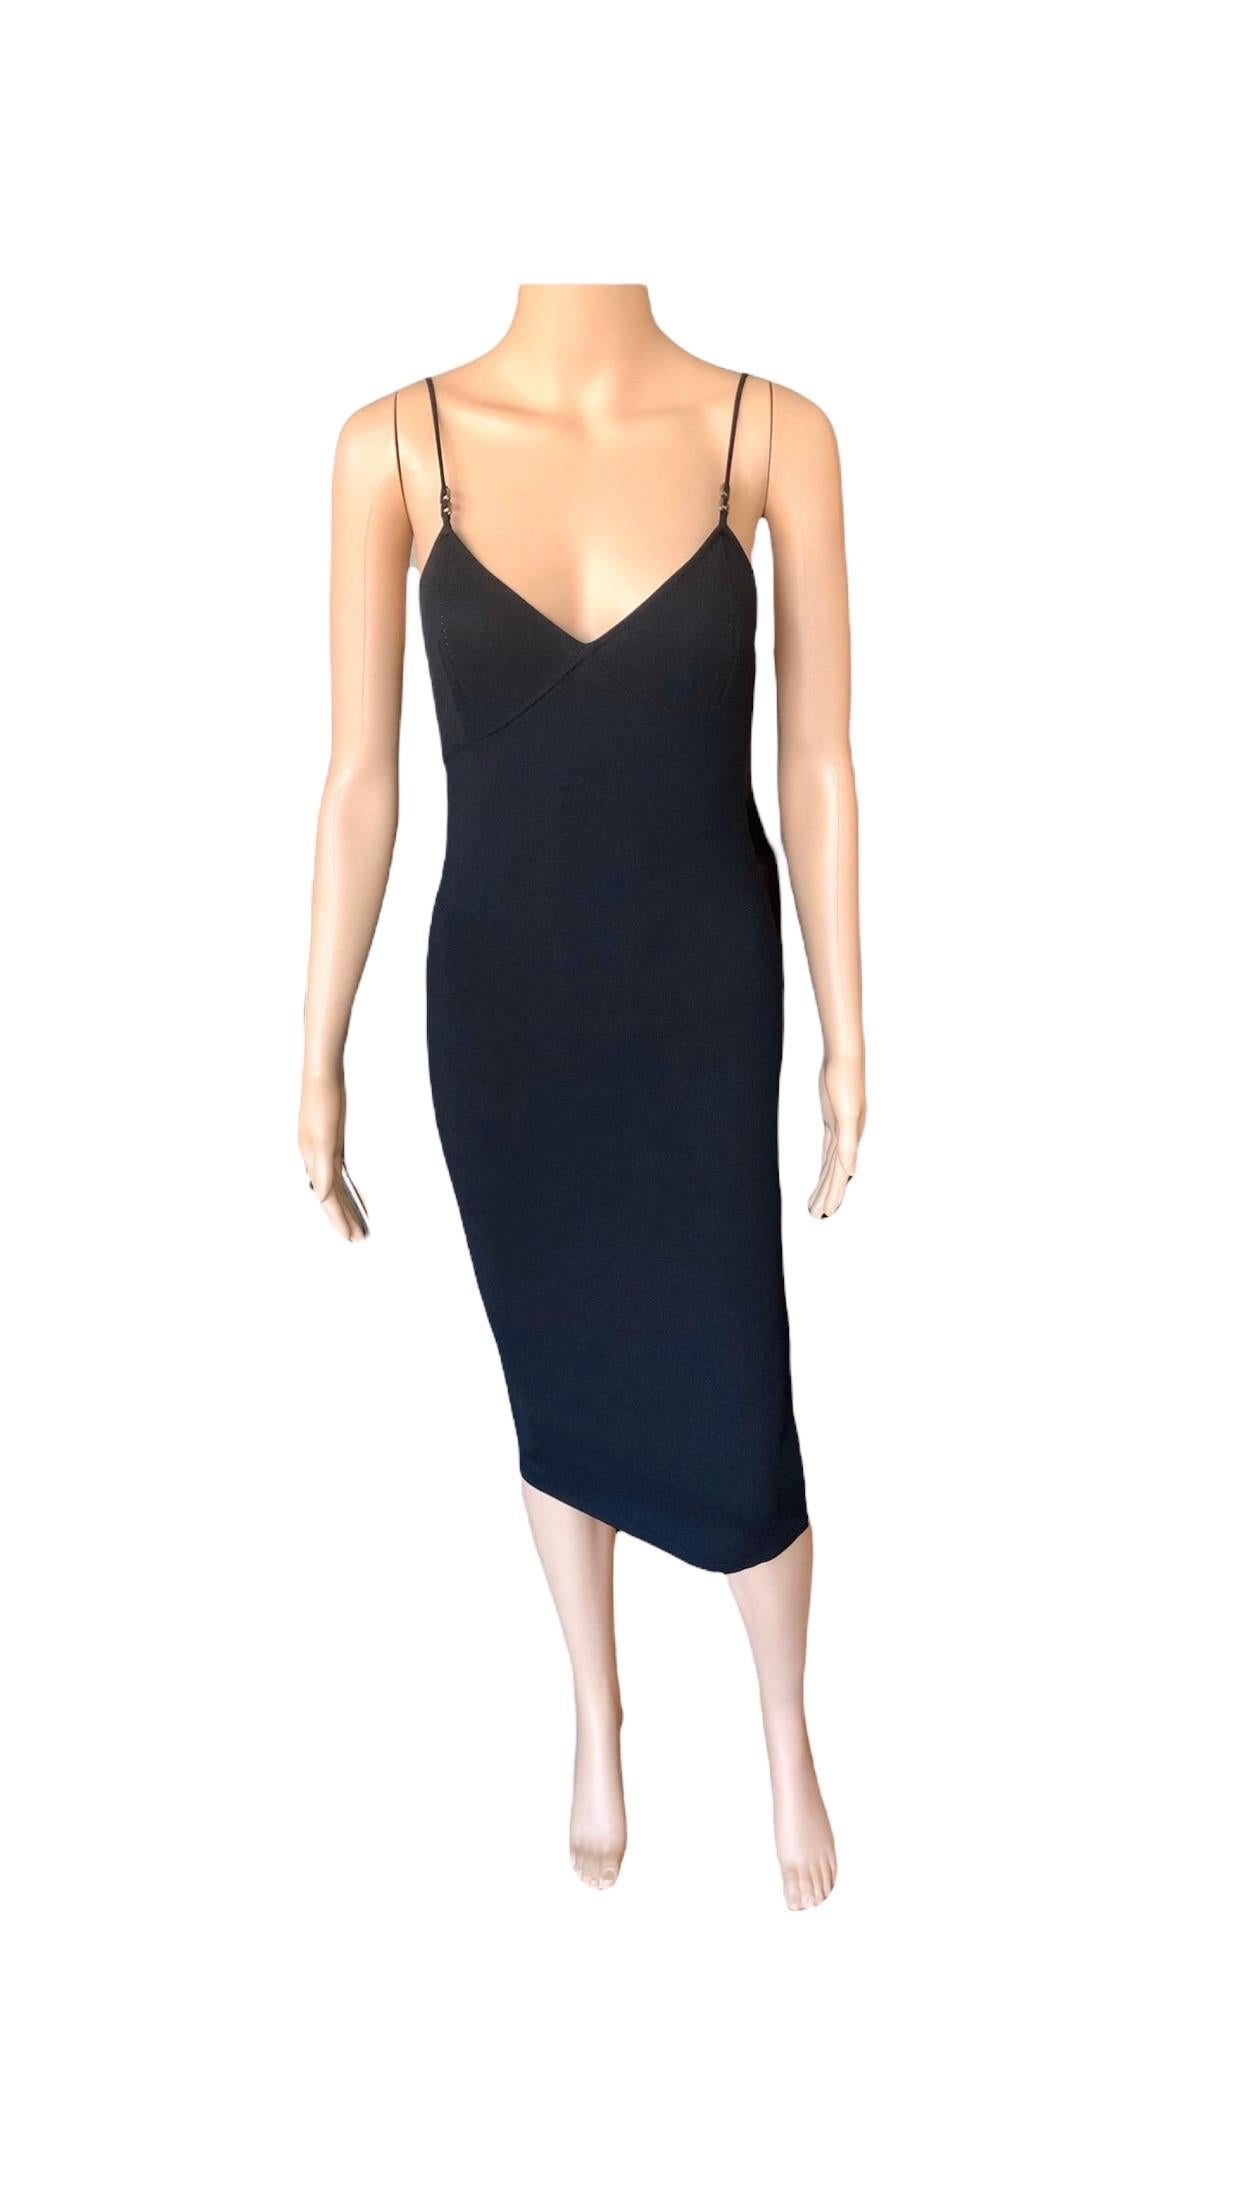 Tom Ford for Gucci S/S 1999 Knit Bodycon Black Dress  For Sale 2